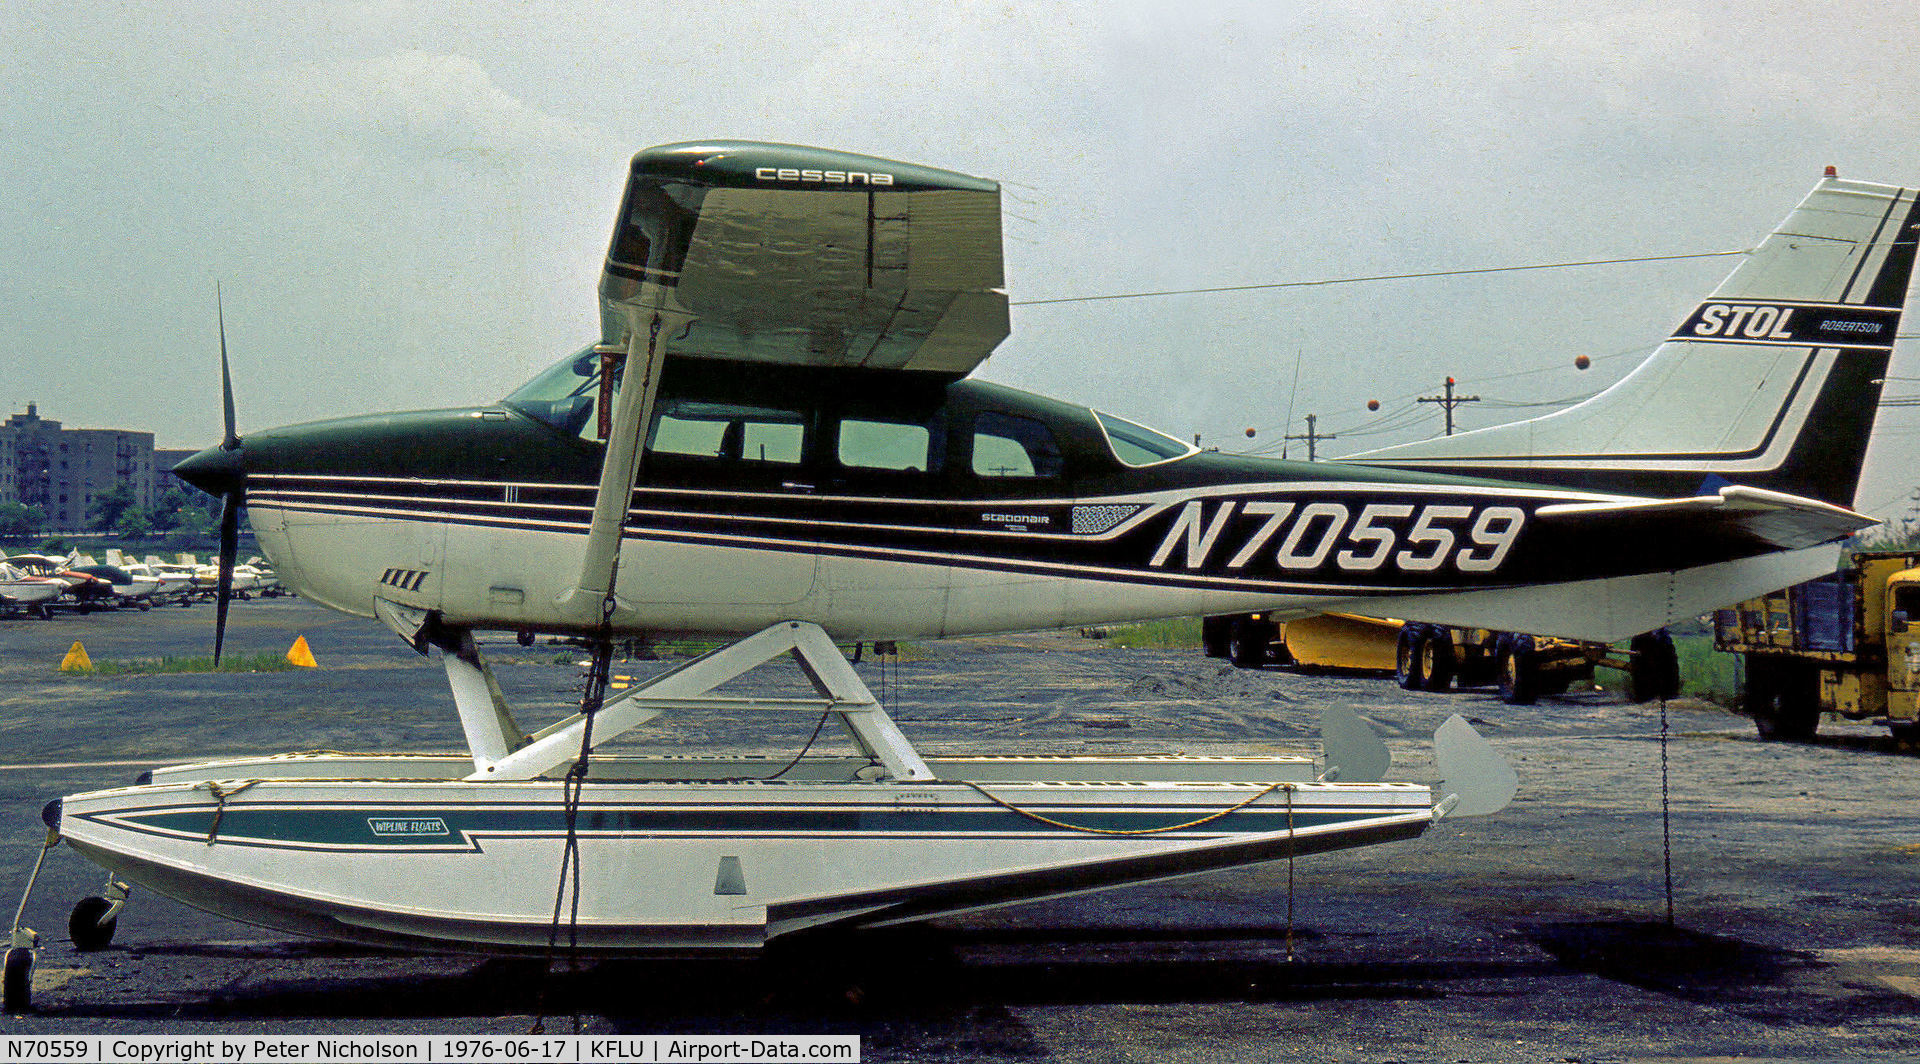 N70559, 1973 Cessna U206F Stationair C/N U20602082, This Cessna 206F Stationair floatplane was seen at Flushing Airport, New York in the Summer of 1976 - the airport later closed in 1984.